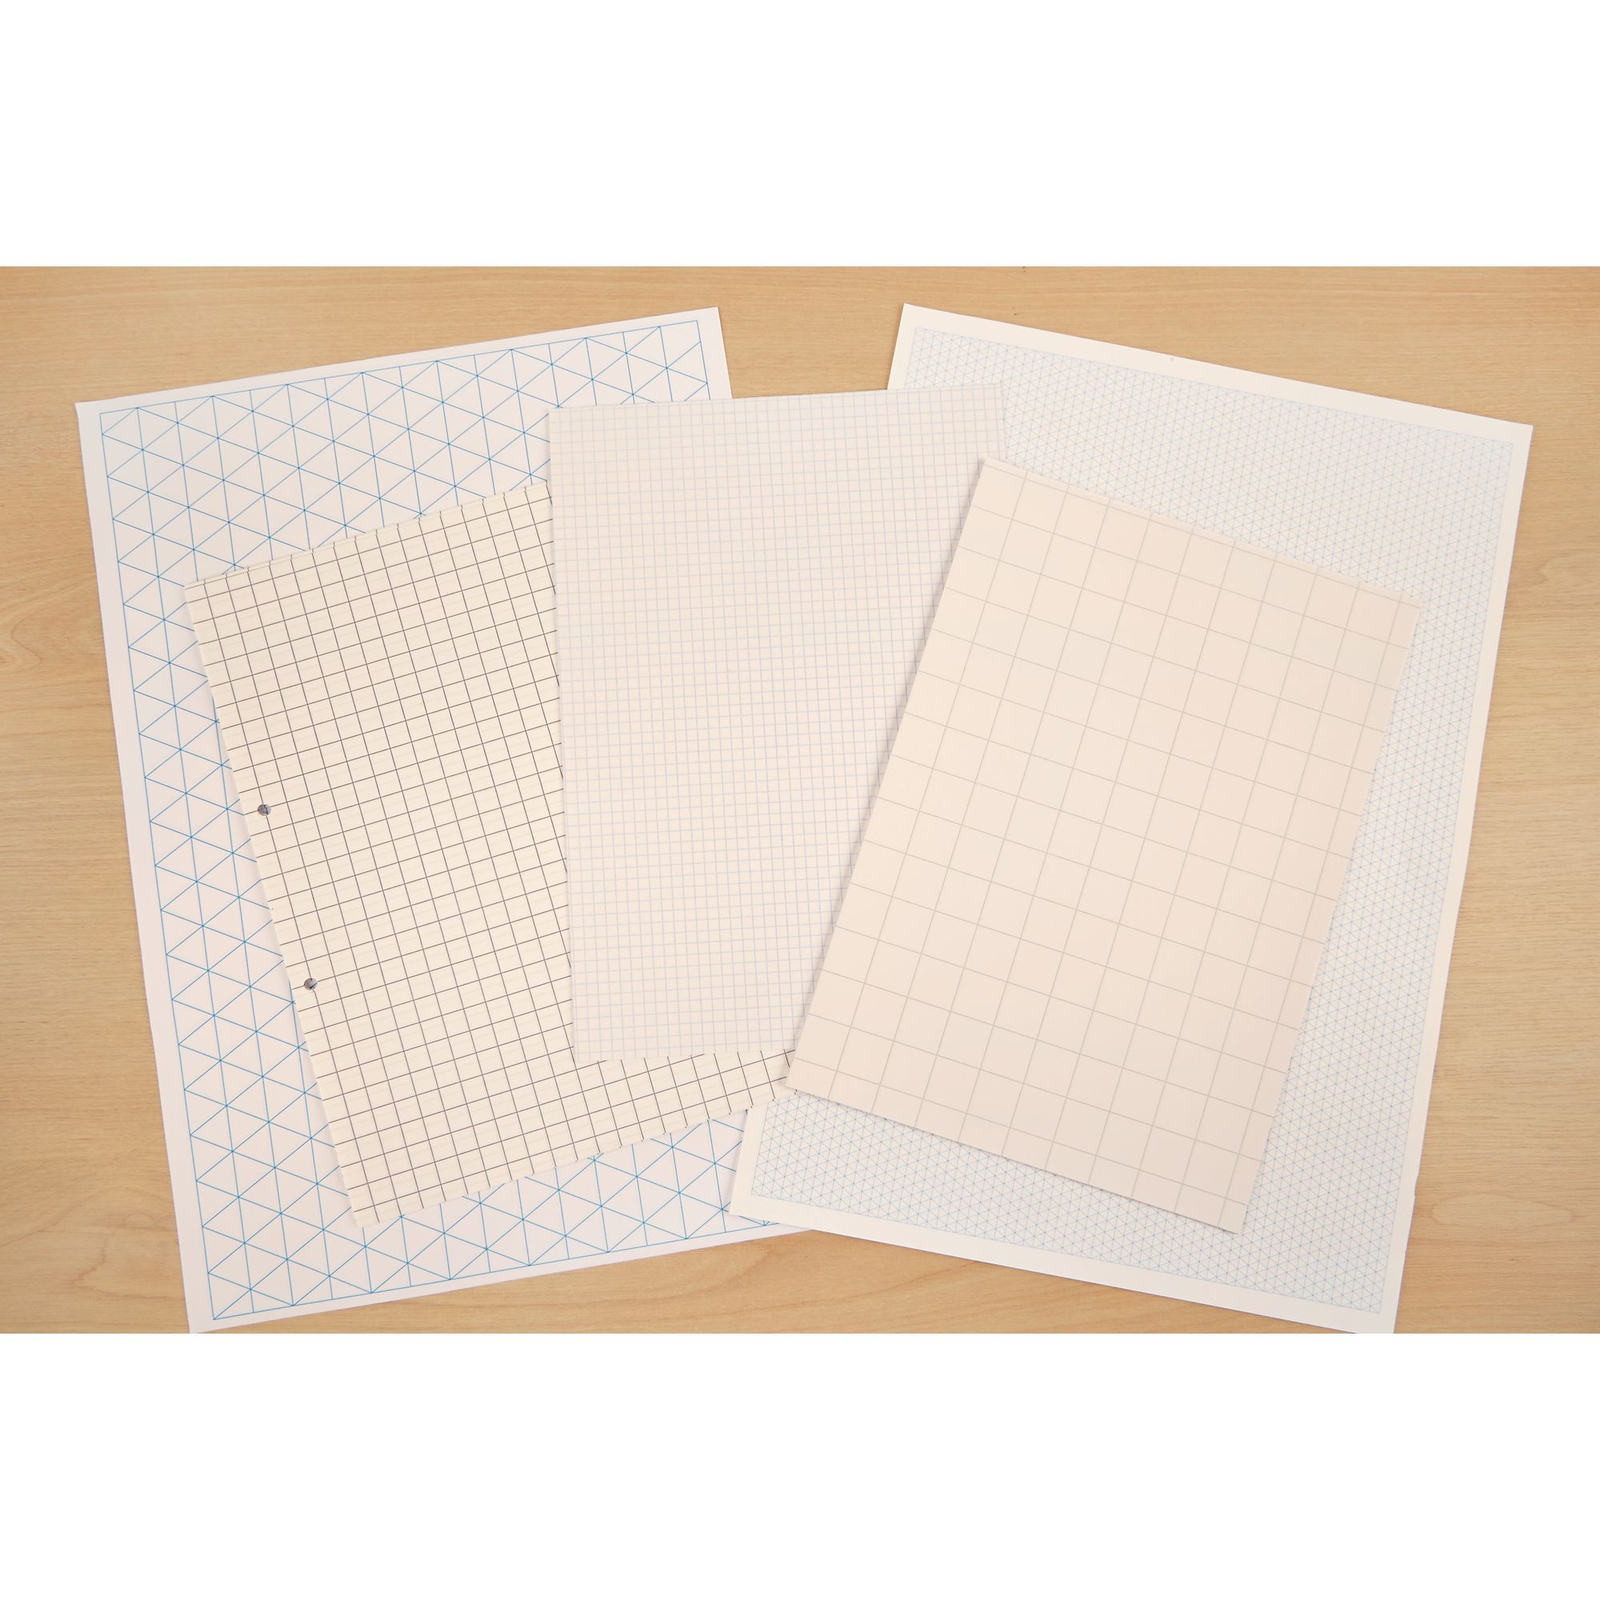 A2 Maths Paper, 10mm Squared, Unpunched - 1 Ream